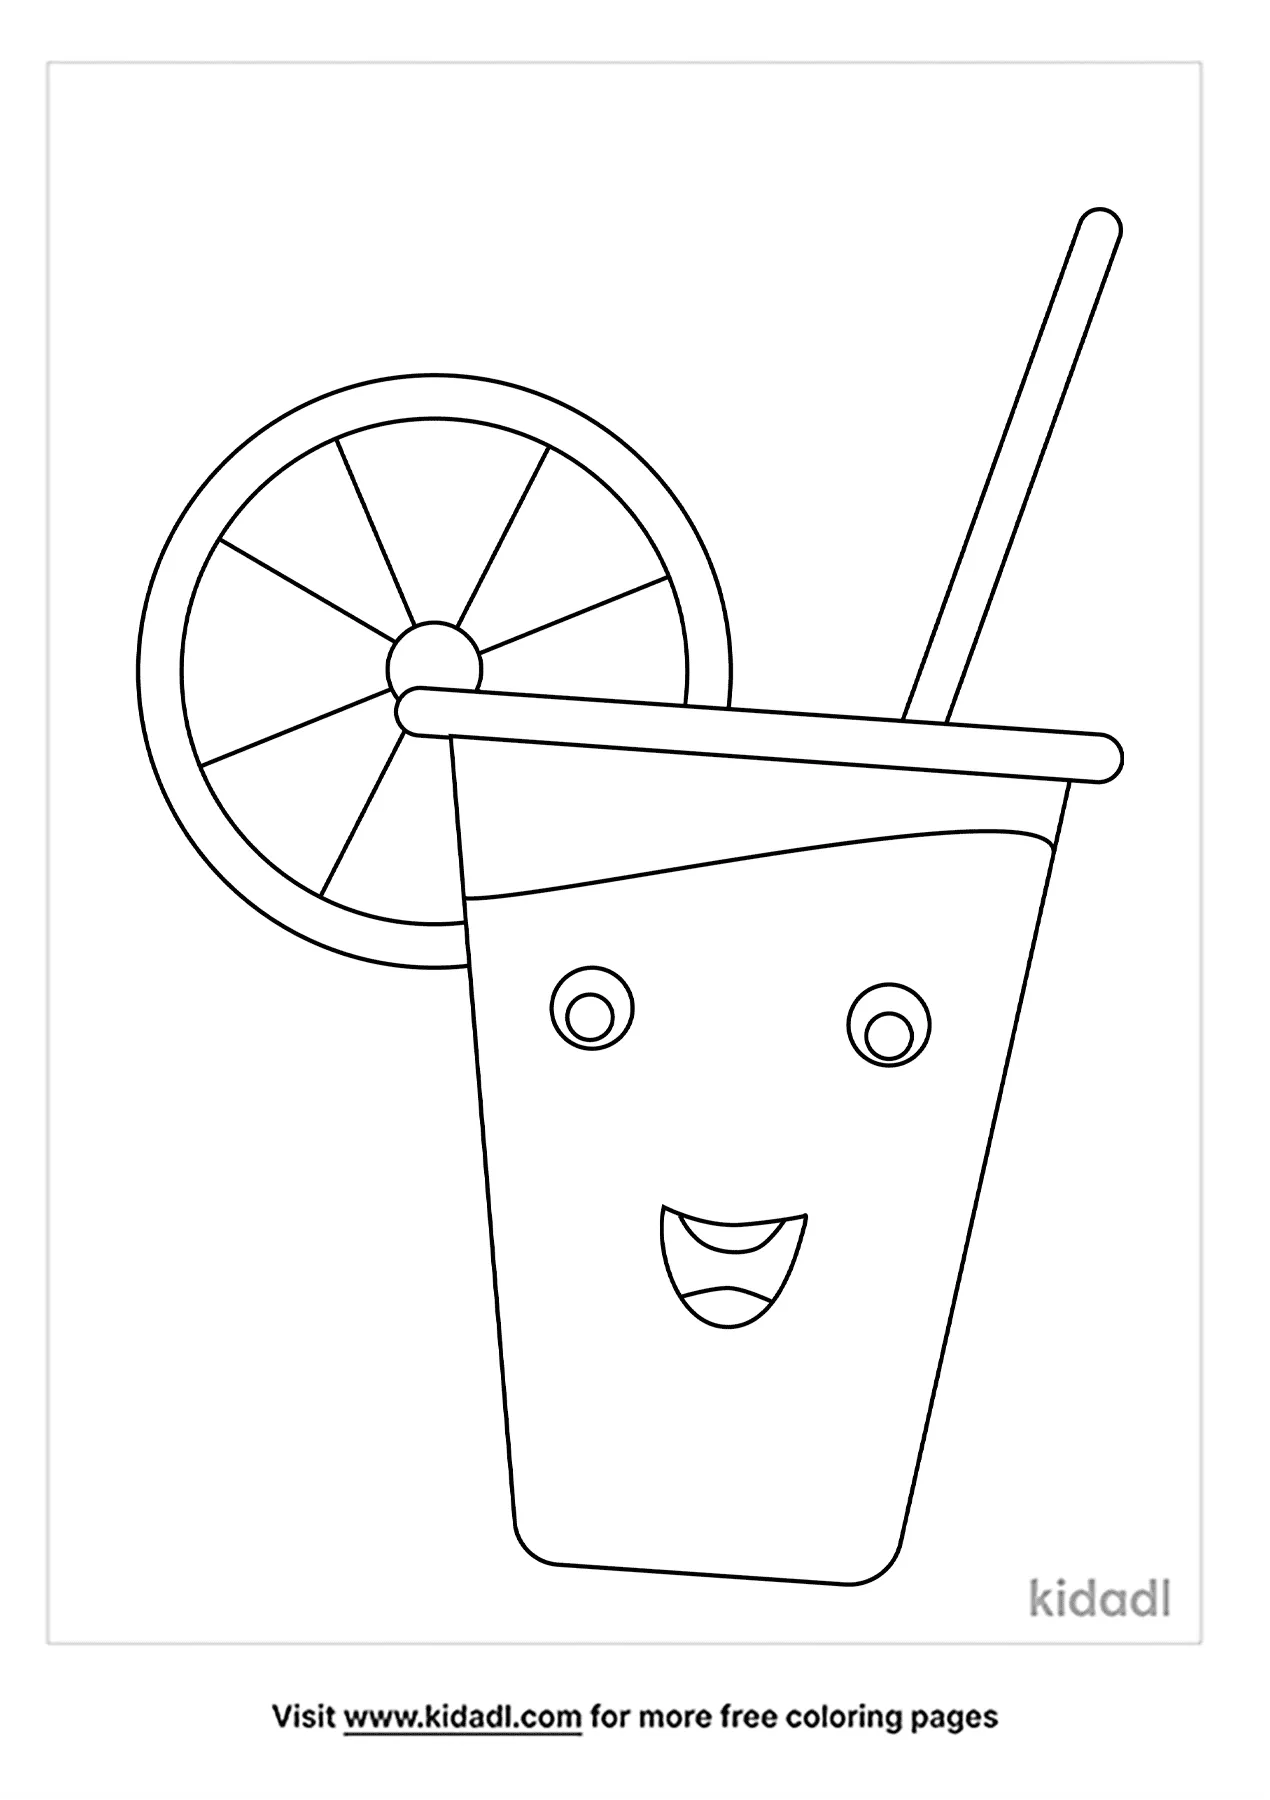 Summertime Coloring Pages Free Summer Coloring Pages Kidadl